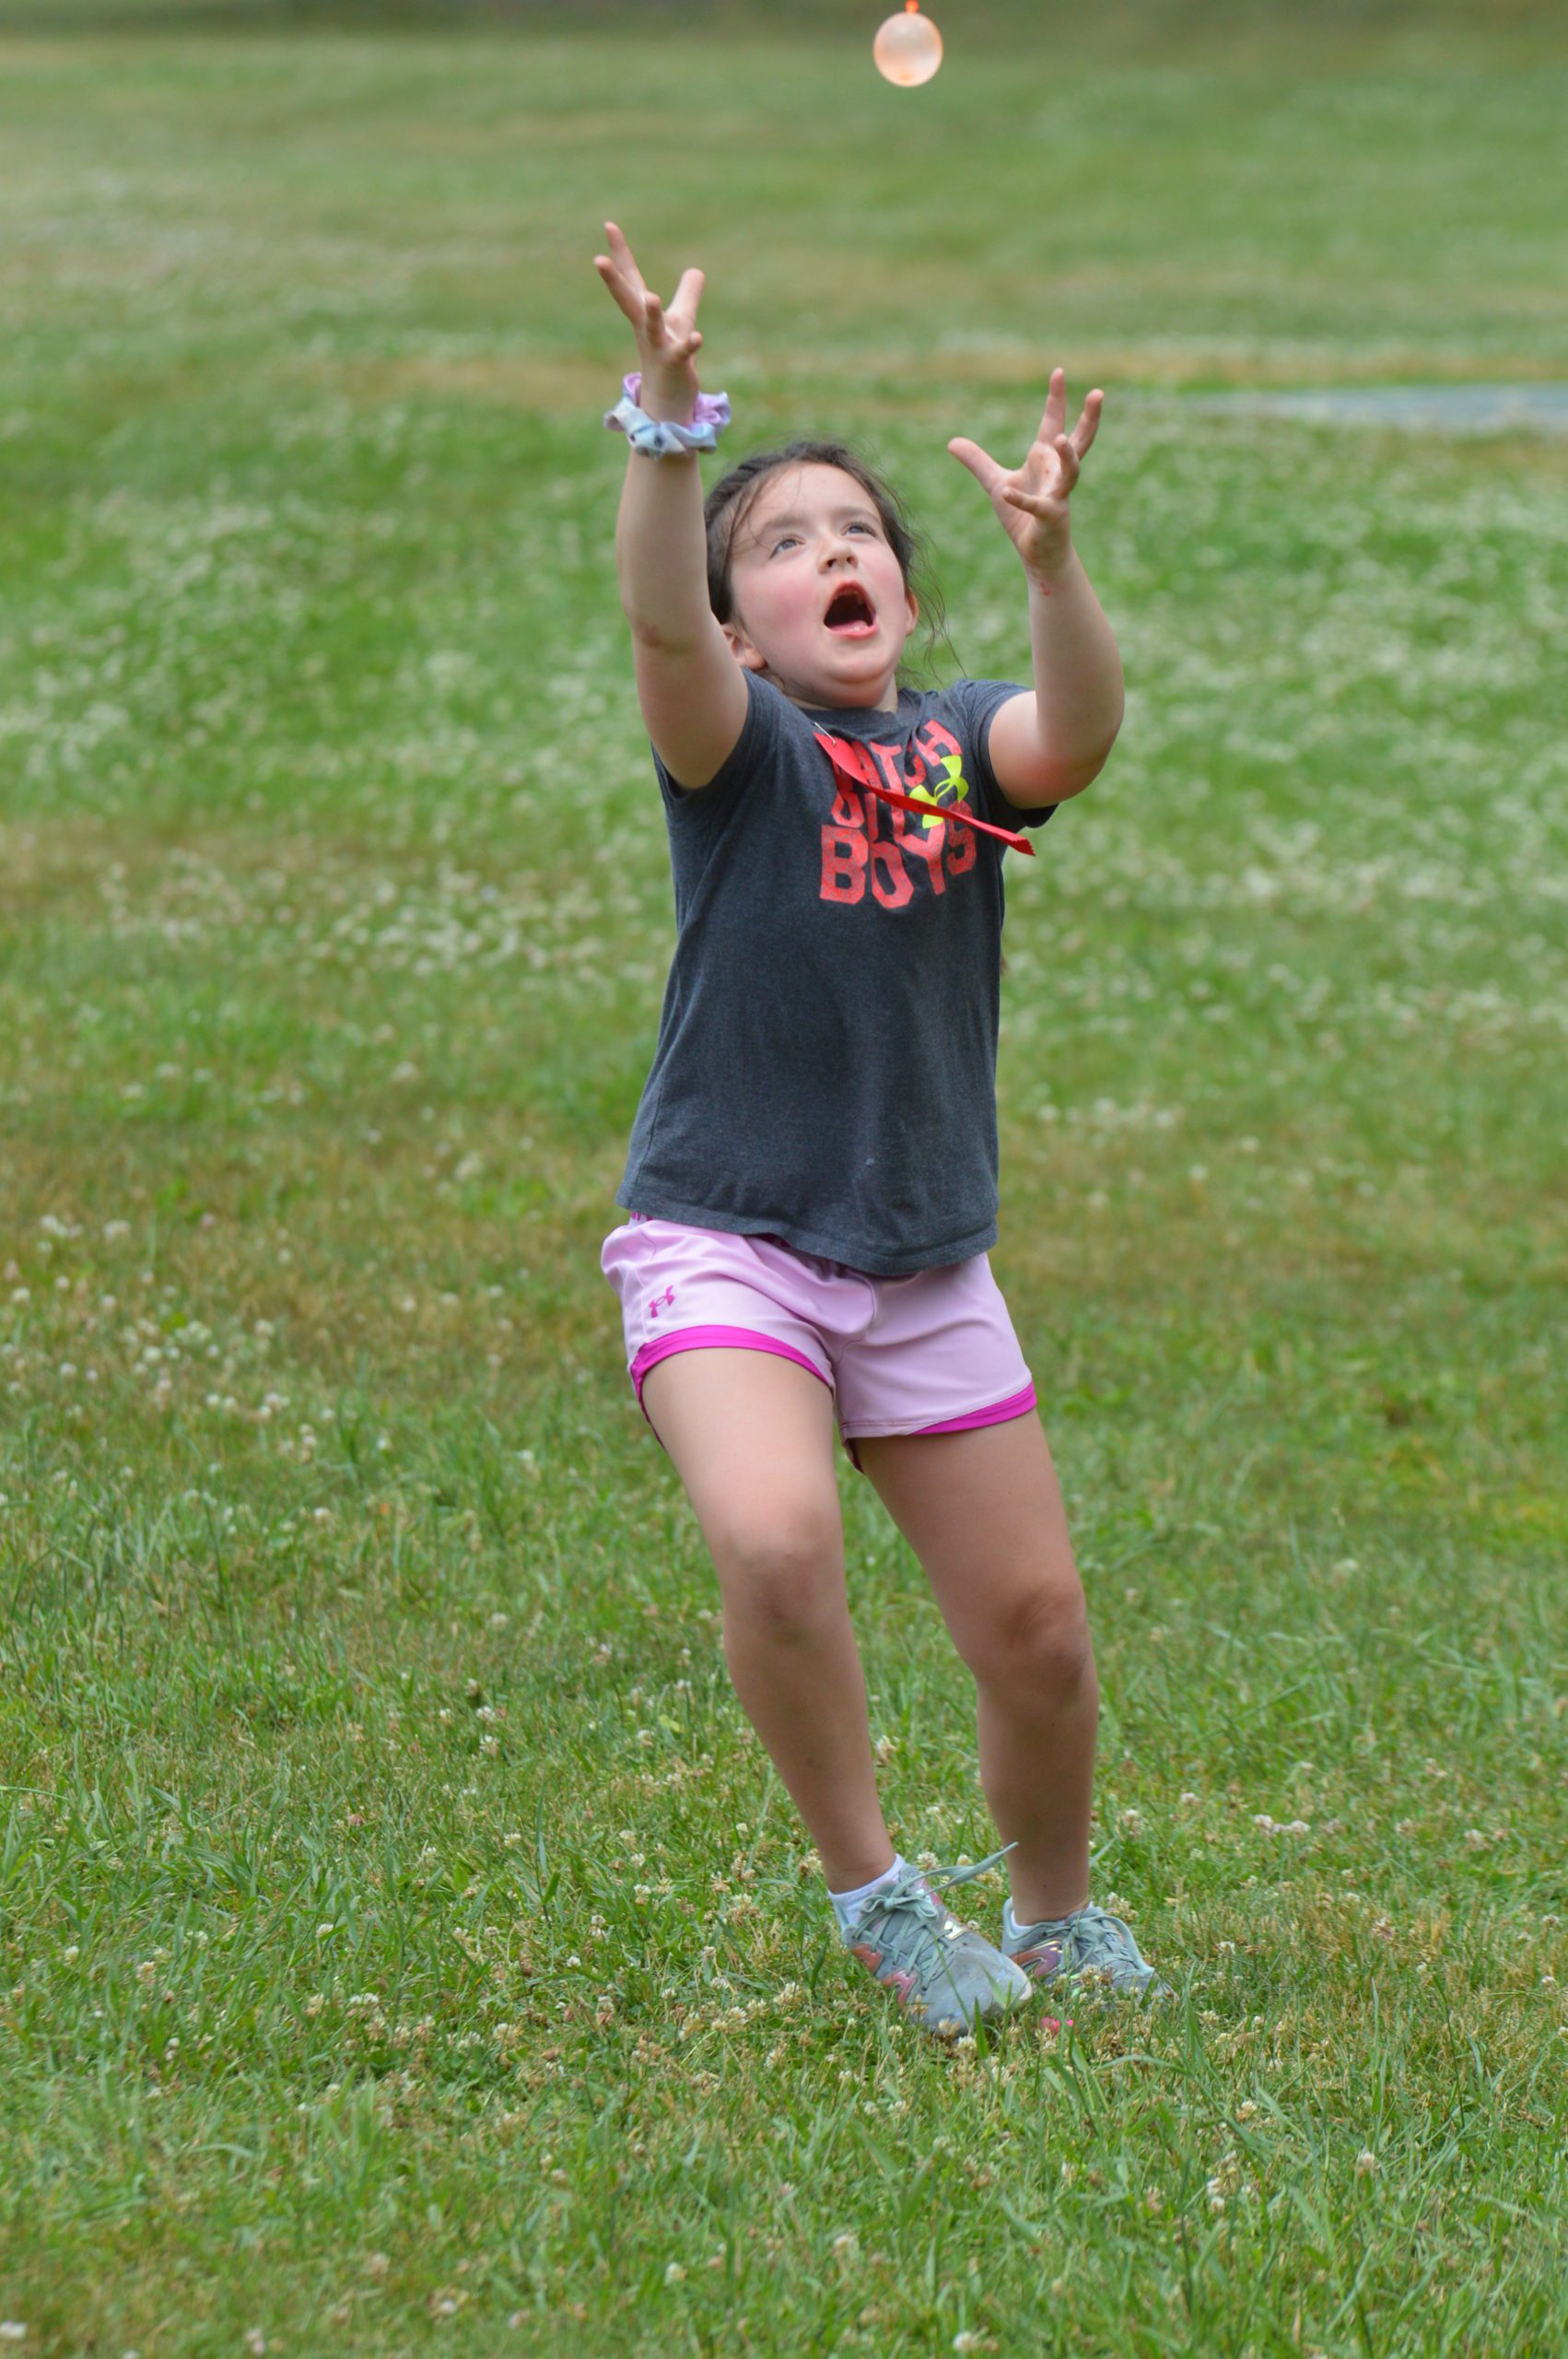 Water balloon toss at Field Day